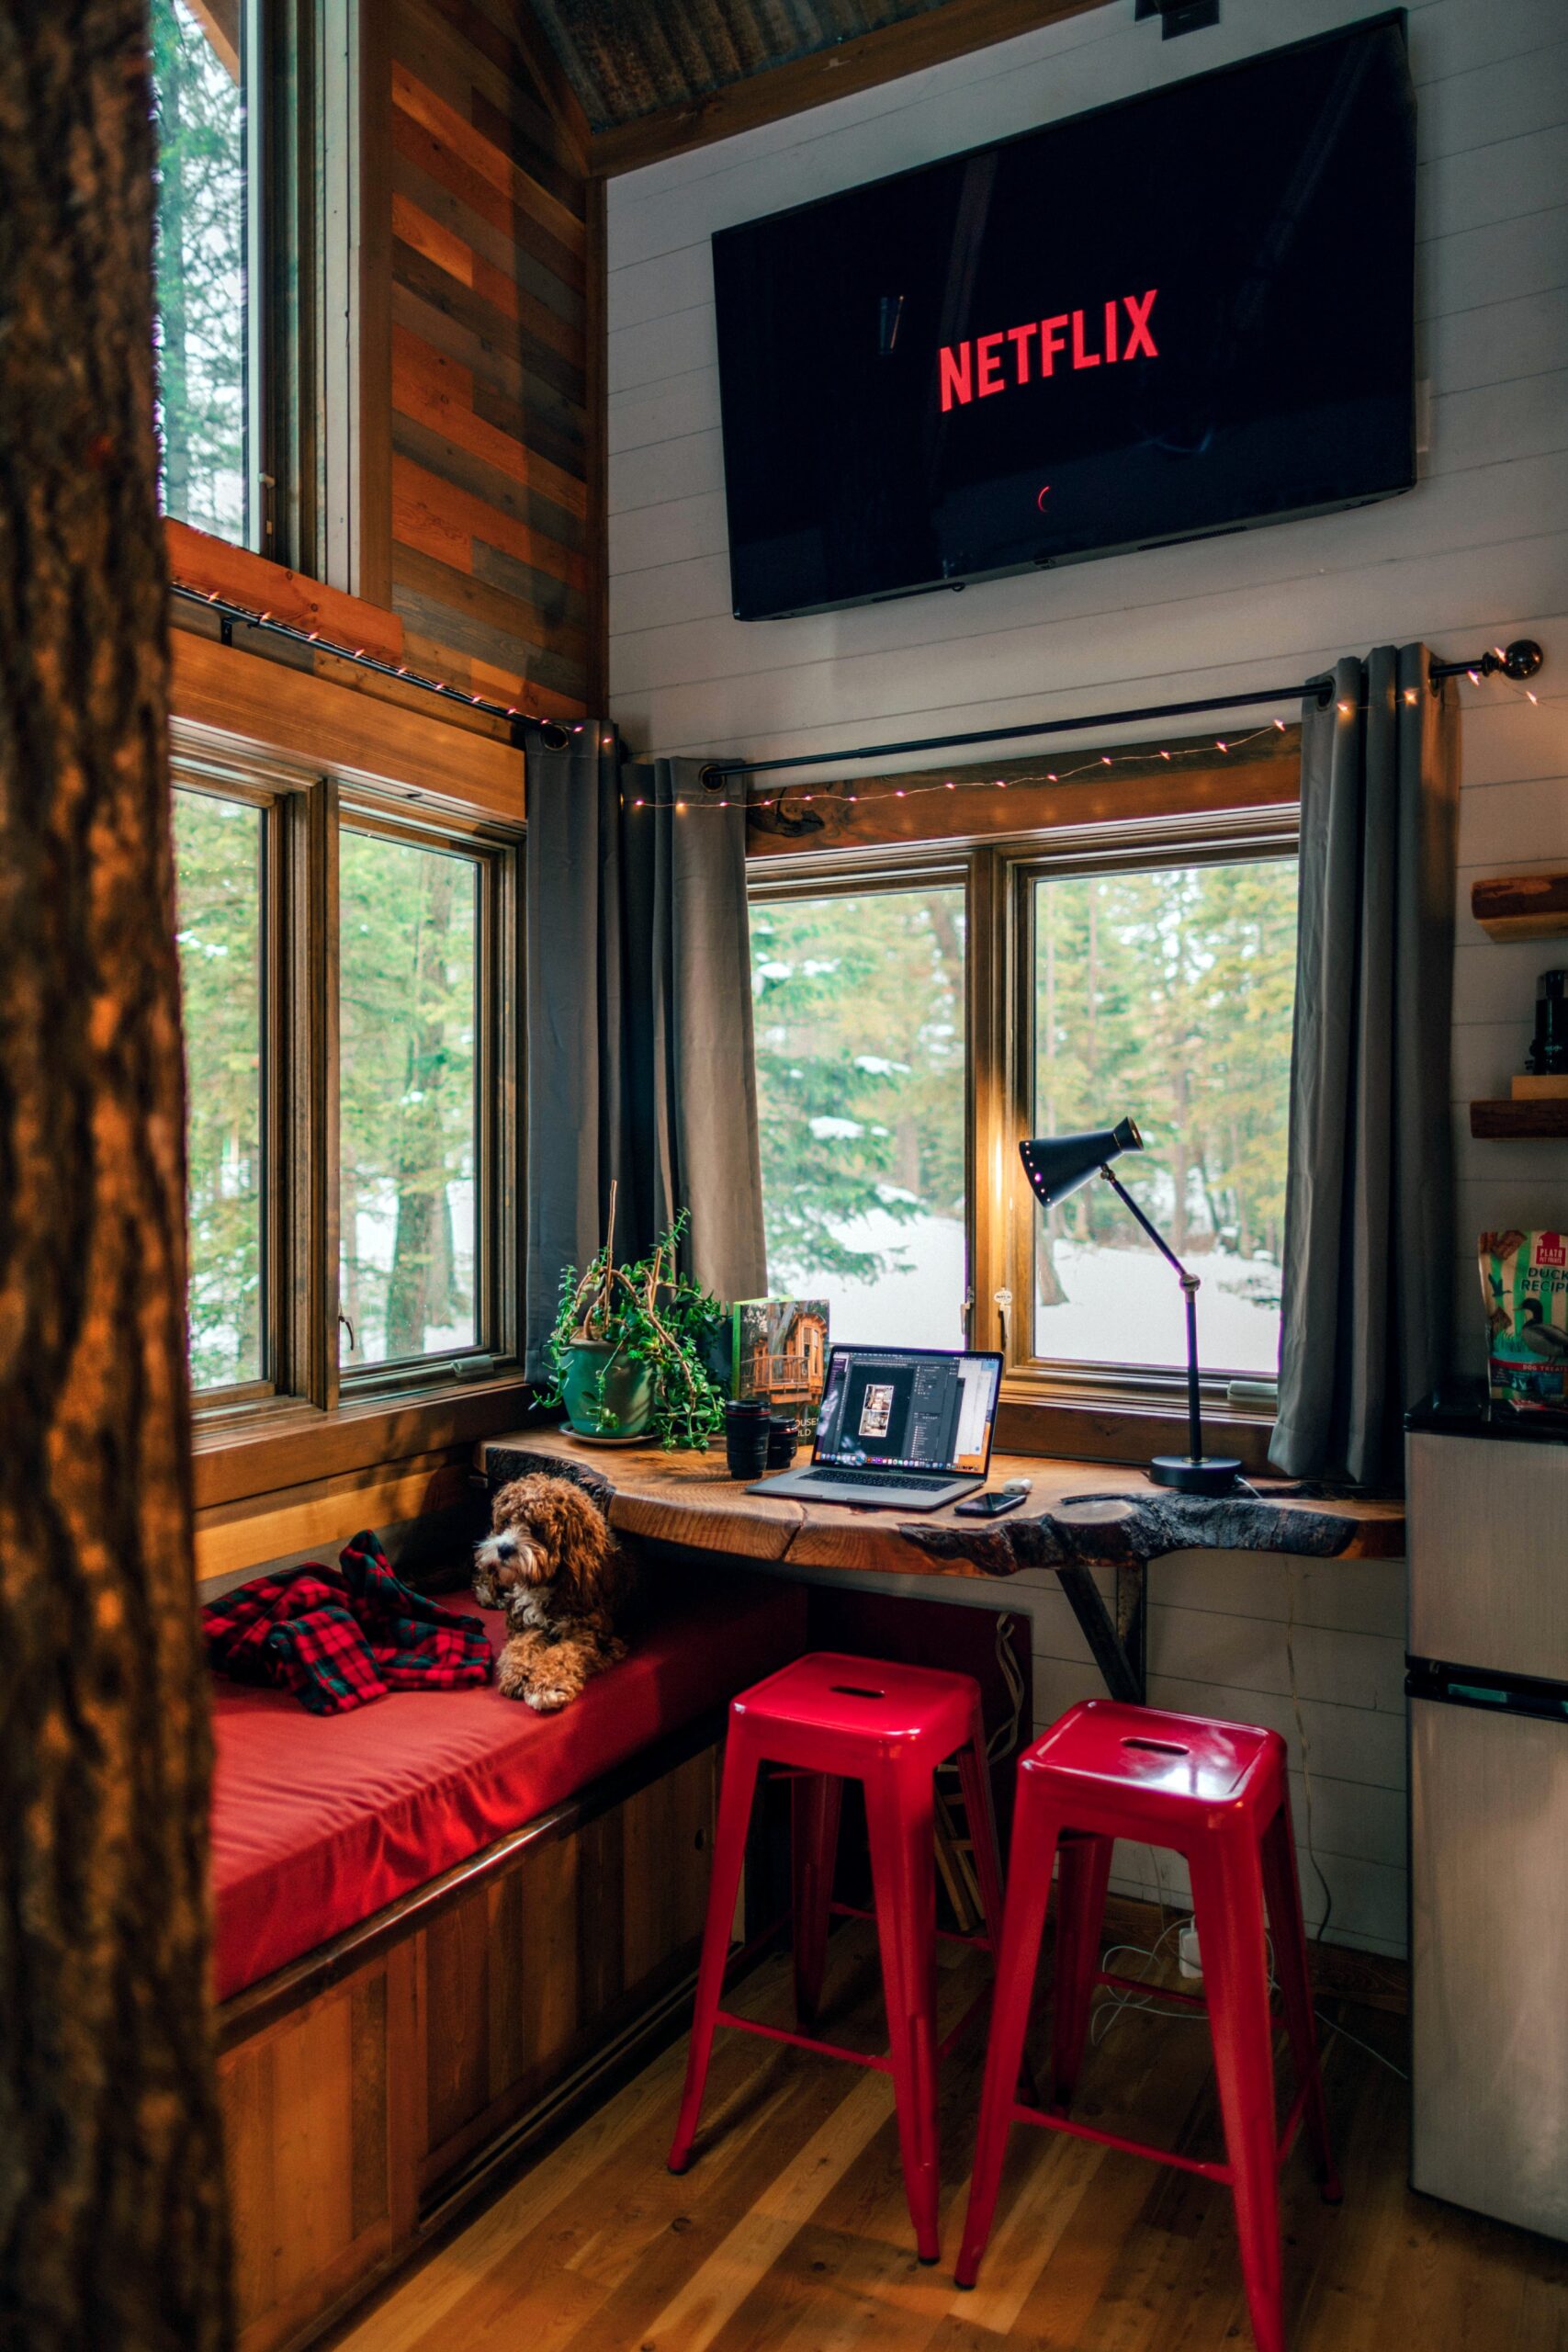 Cozy vacation rental cabin with Netflix on TV, inviting atmosphere.